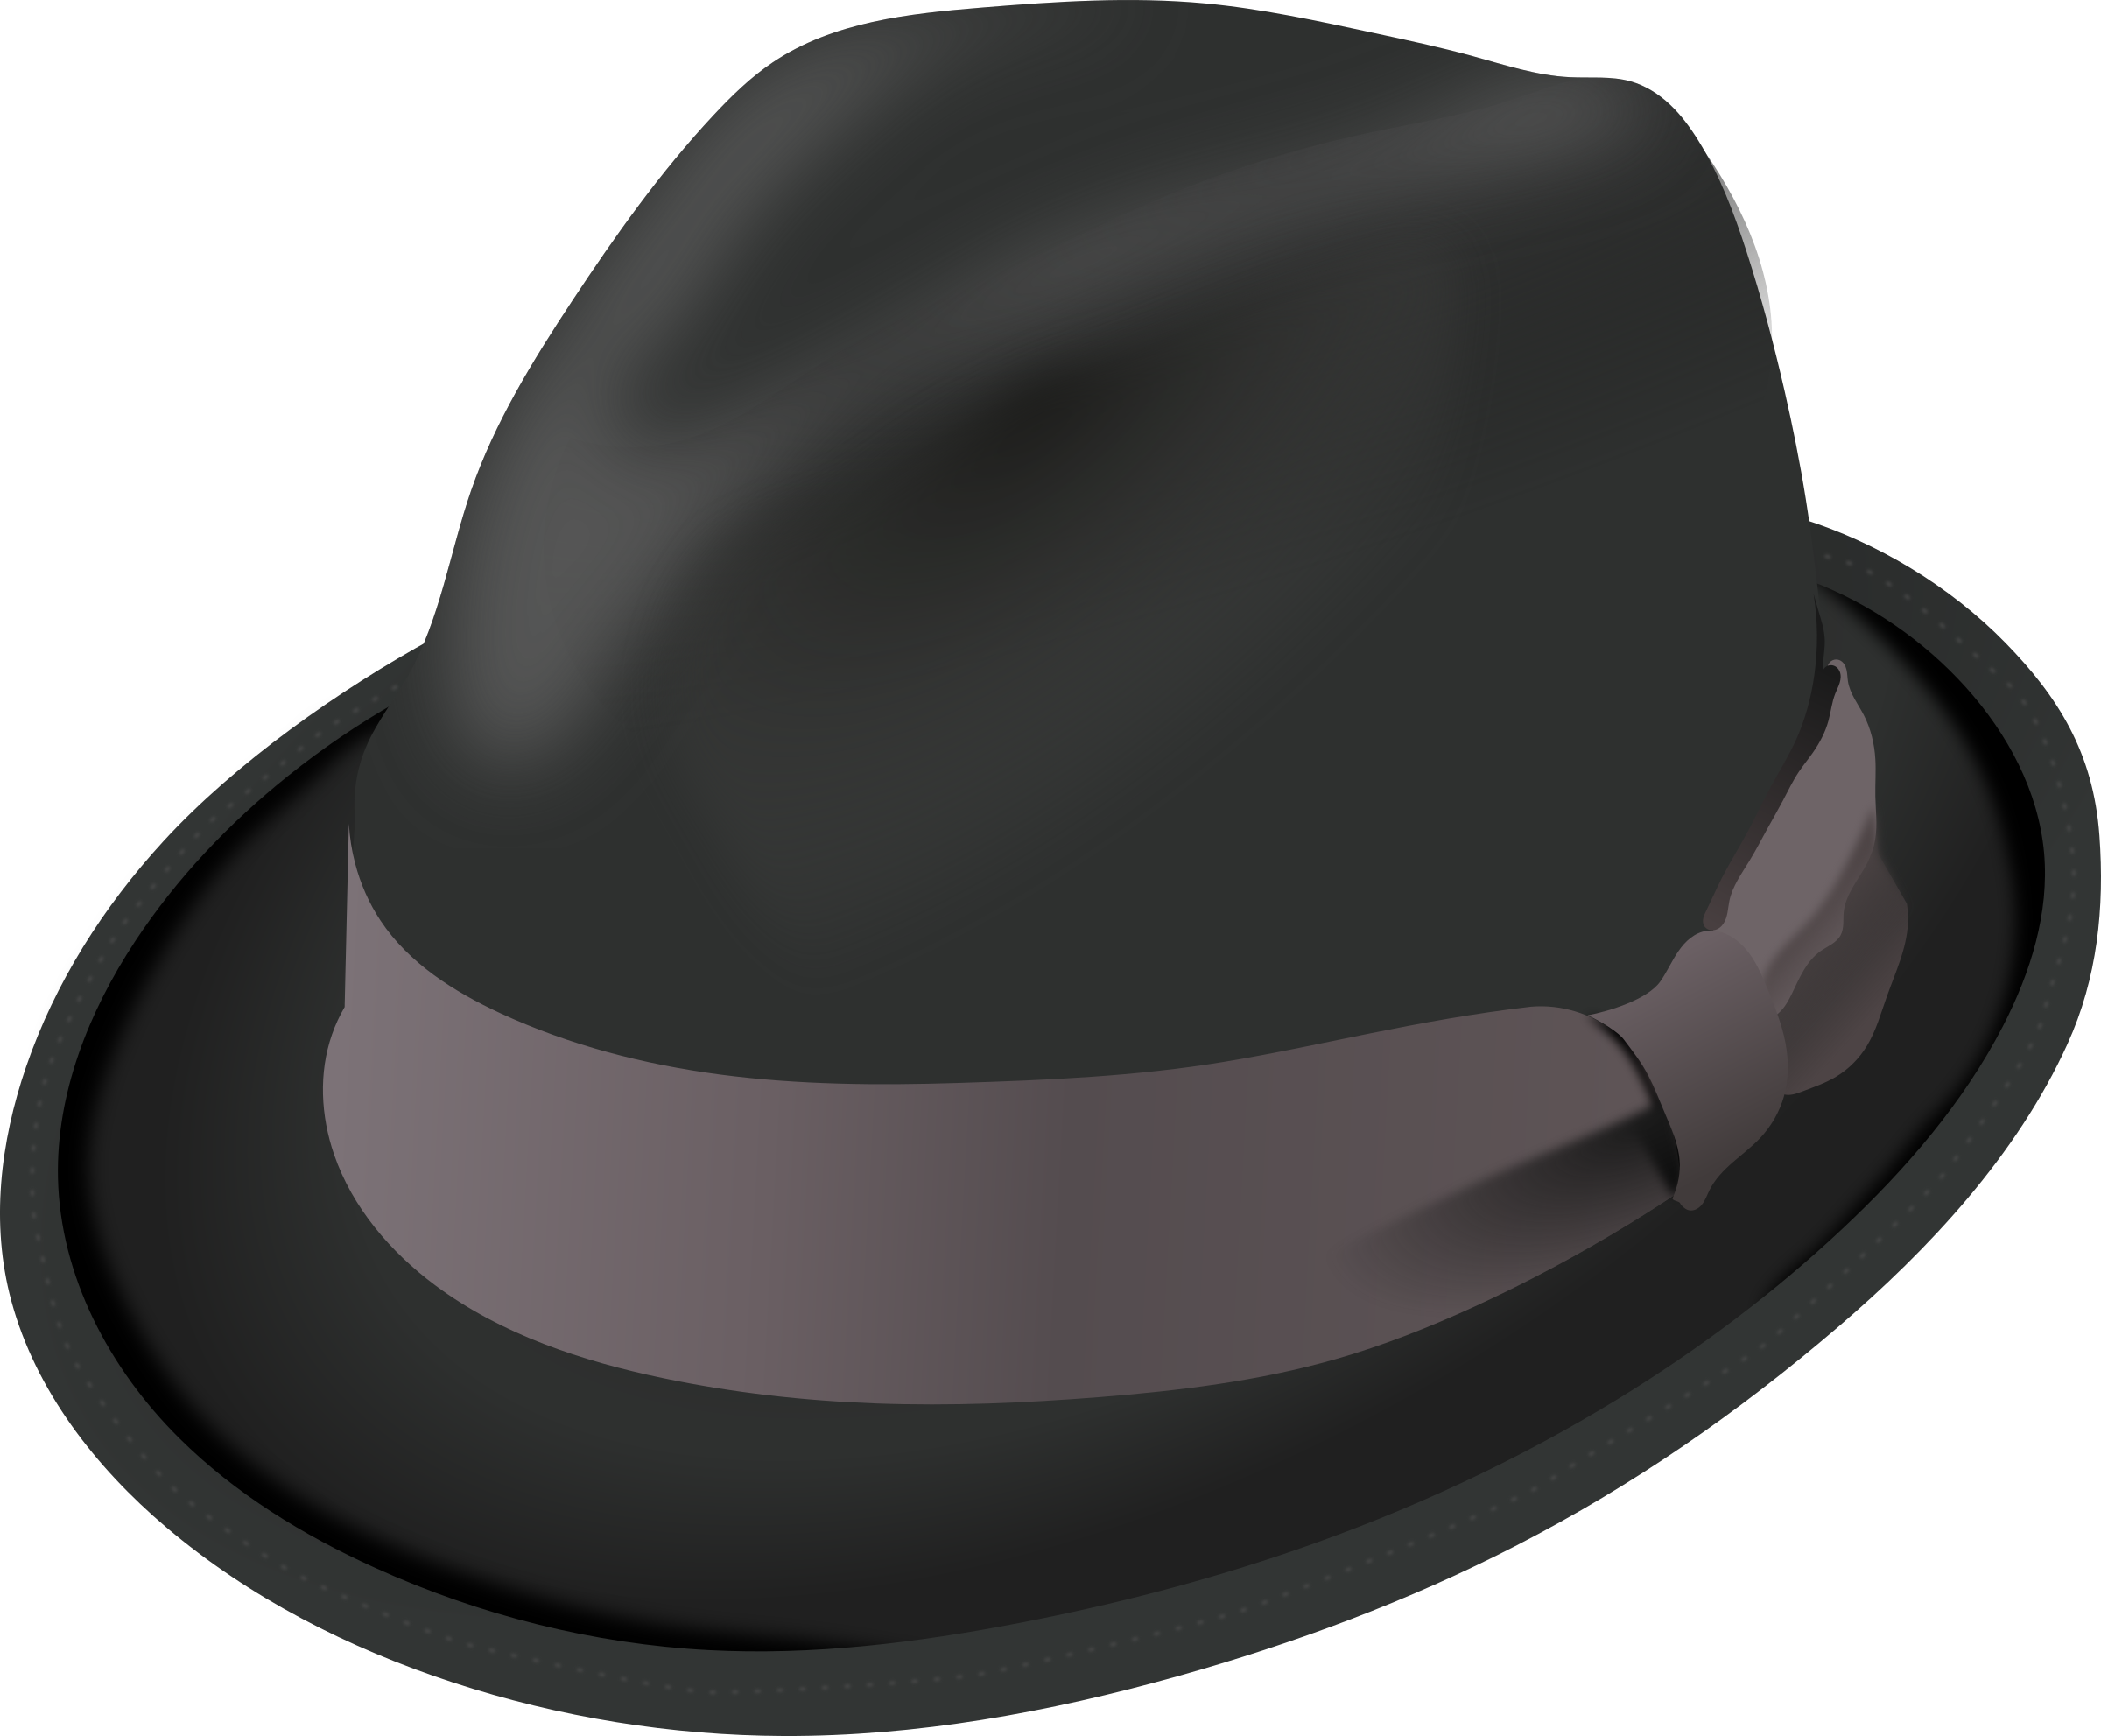 Provided By Openclipart-vectors Via Pixabay - Black Hat (2400x1983)